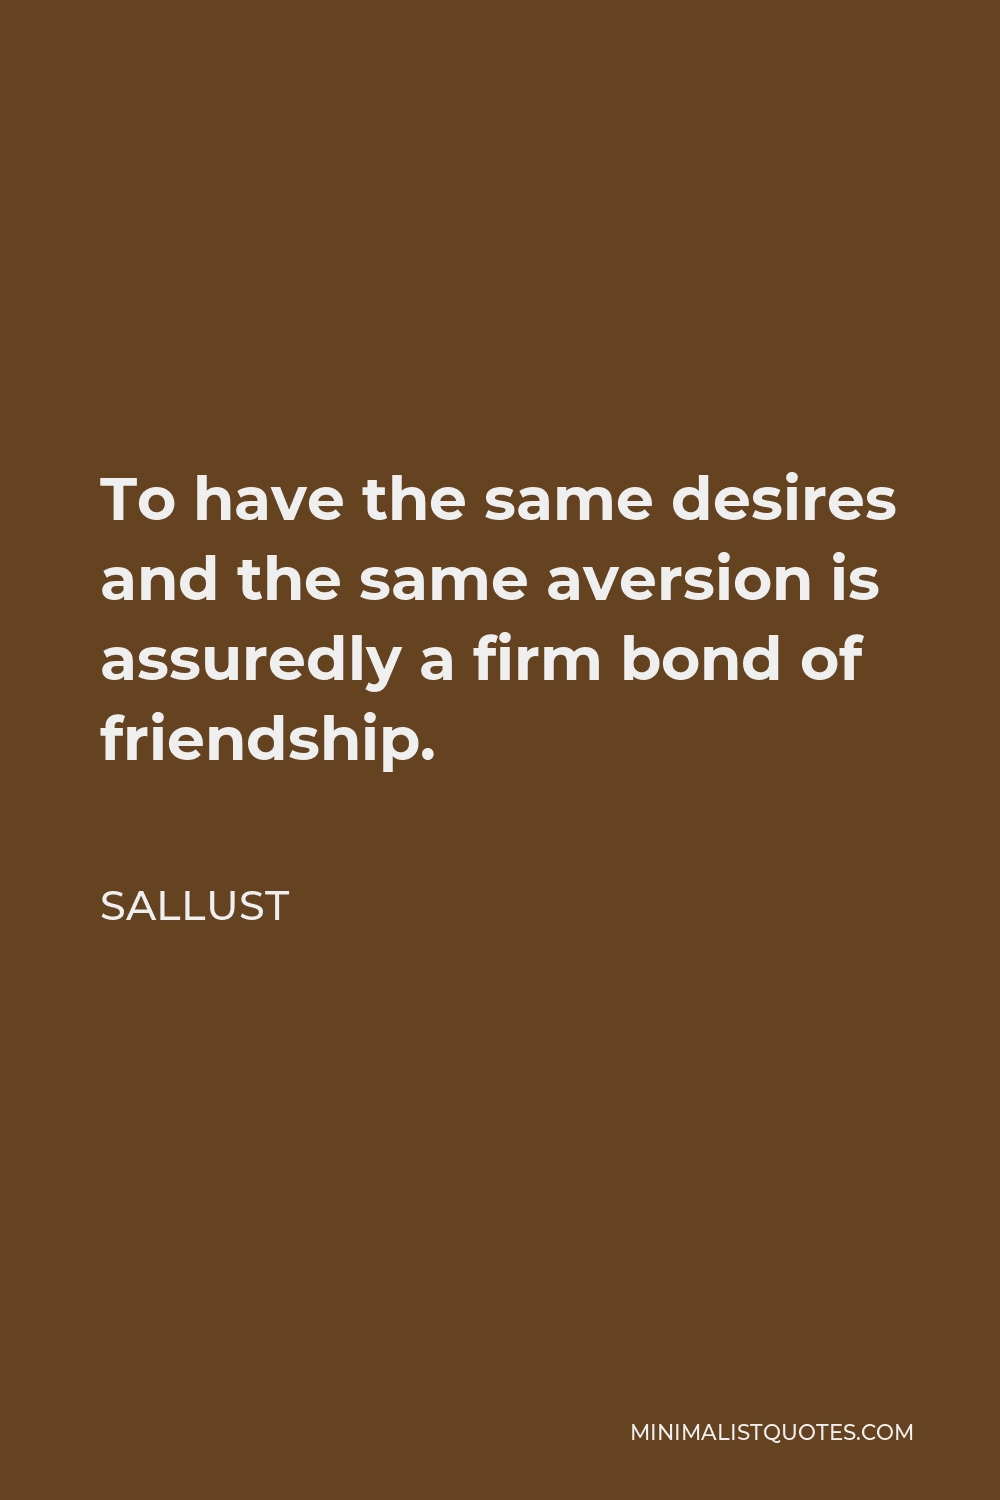 Sallust Quote - To have the same desires and the same aversion is assuredly a firm bond of friendship.